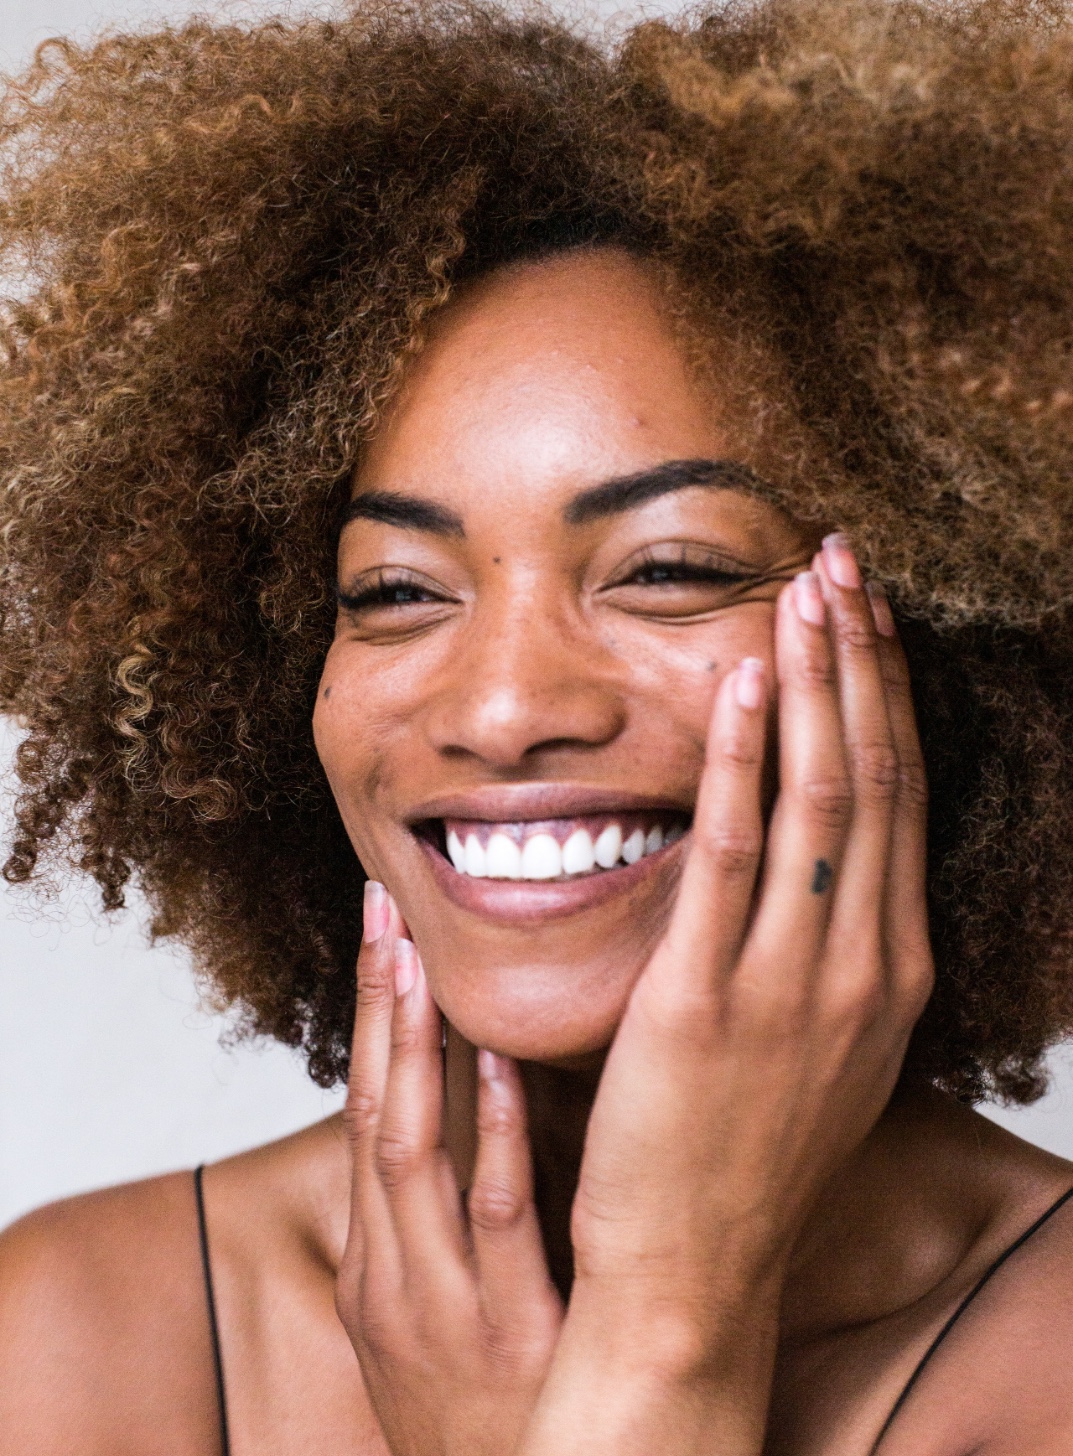 Picture of a model smiling with beautiful skin